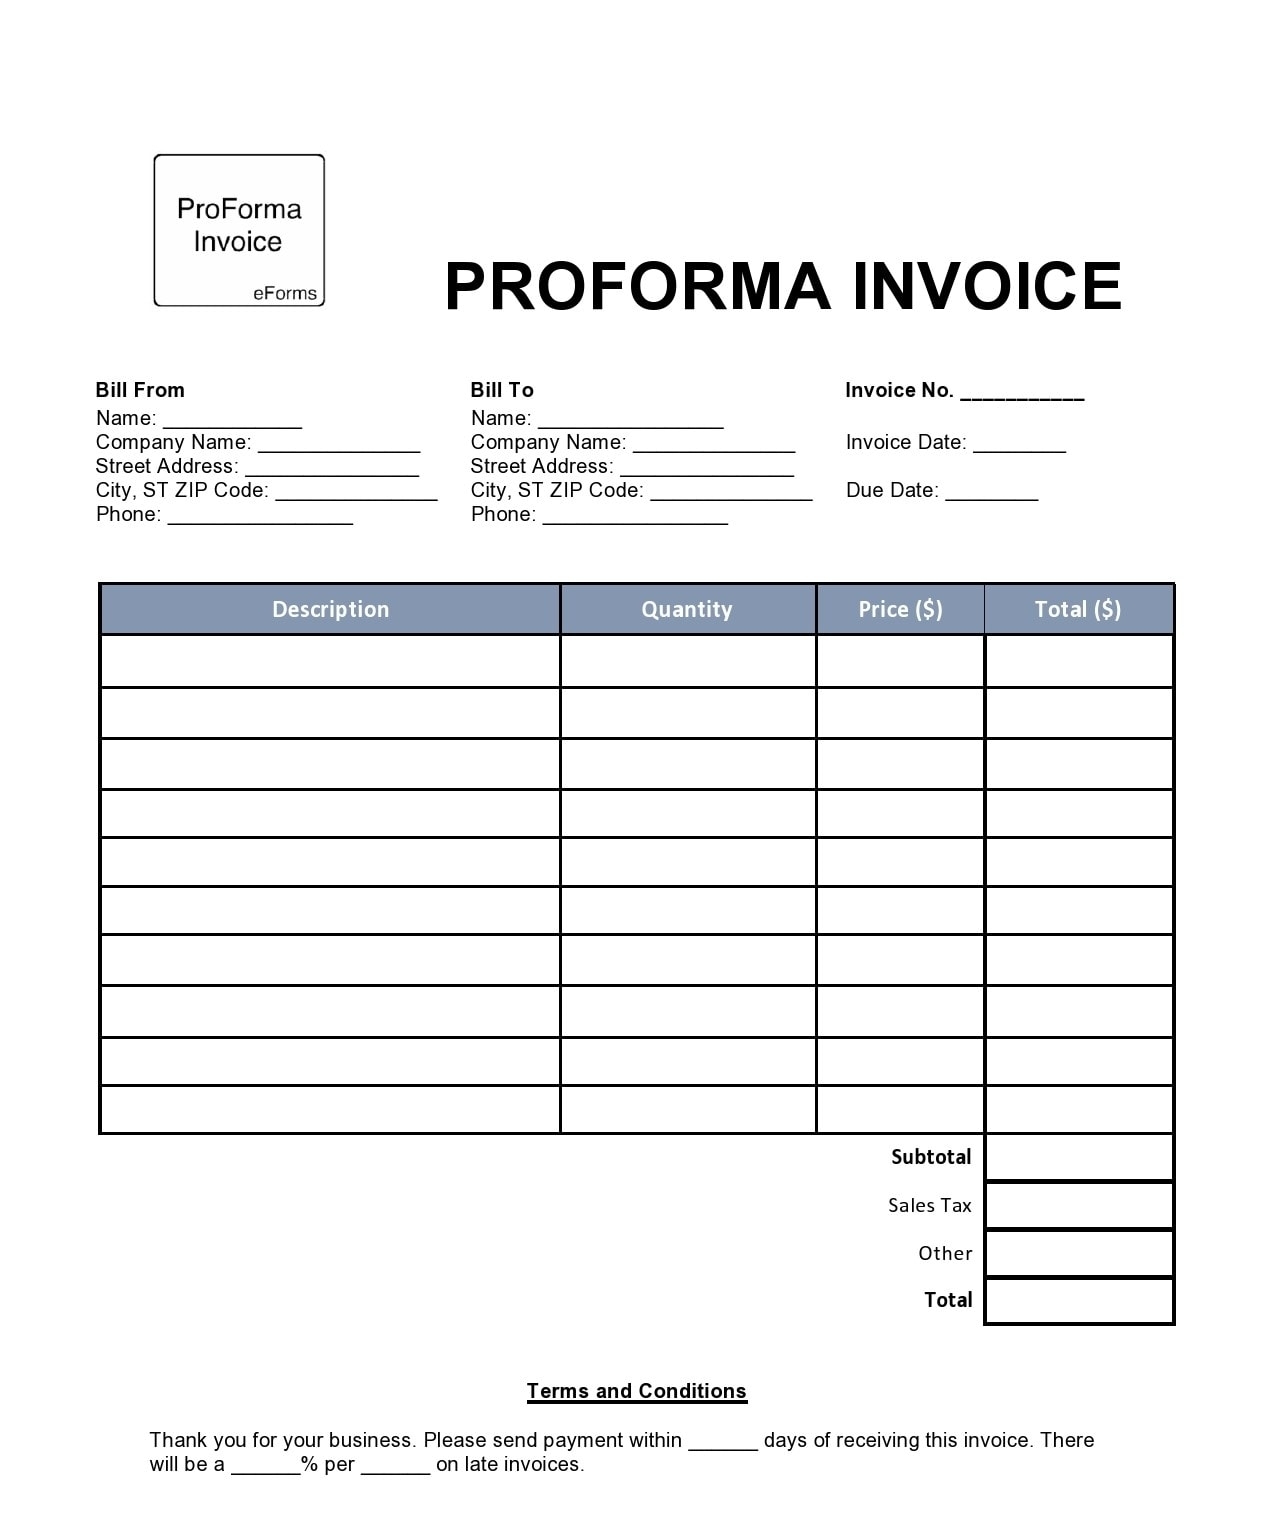 30 Free Proforma Invoice Templates [Excel, Word, Pdf] – Templatearchive Intended For Free Proforma Invoice Template Word